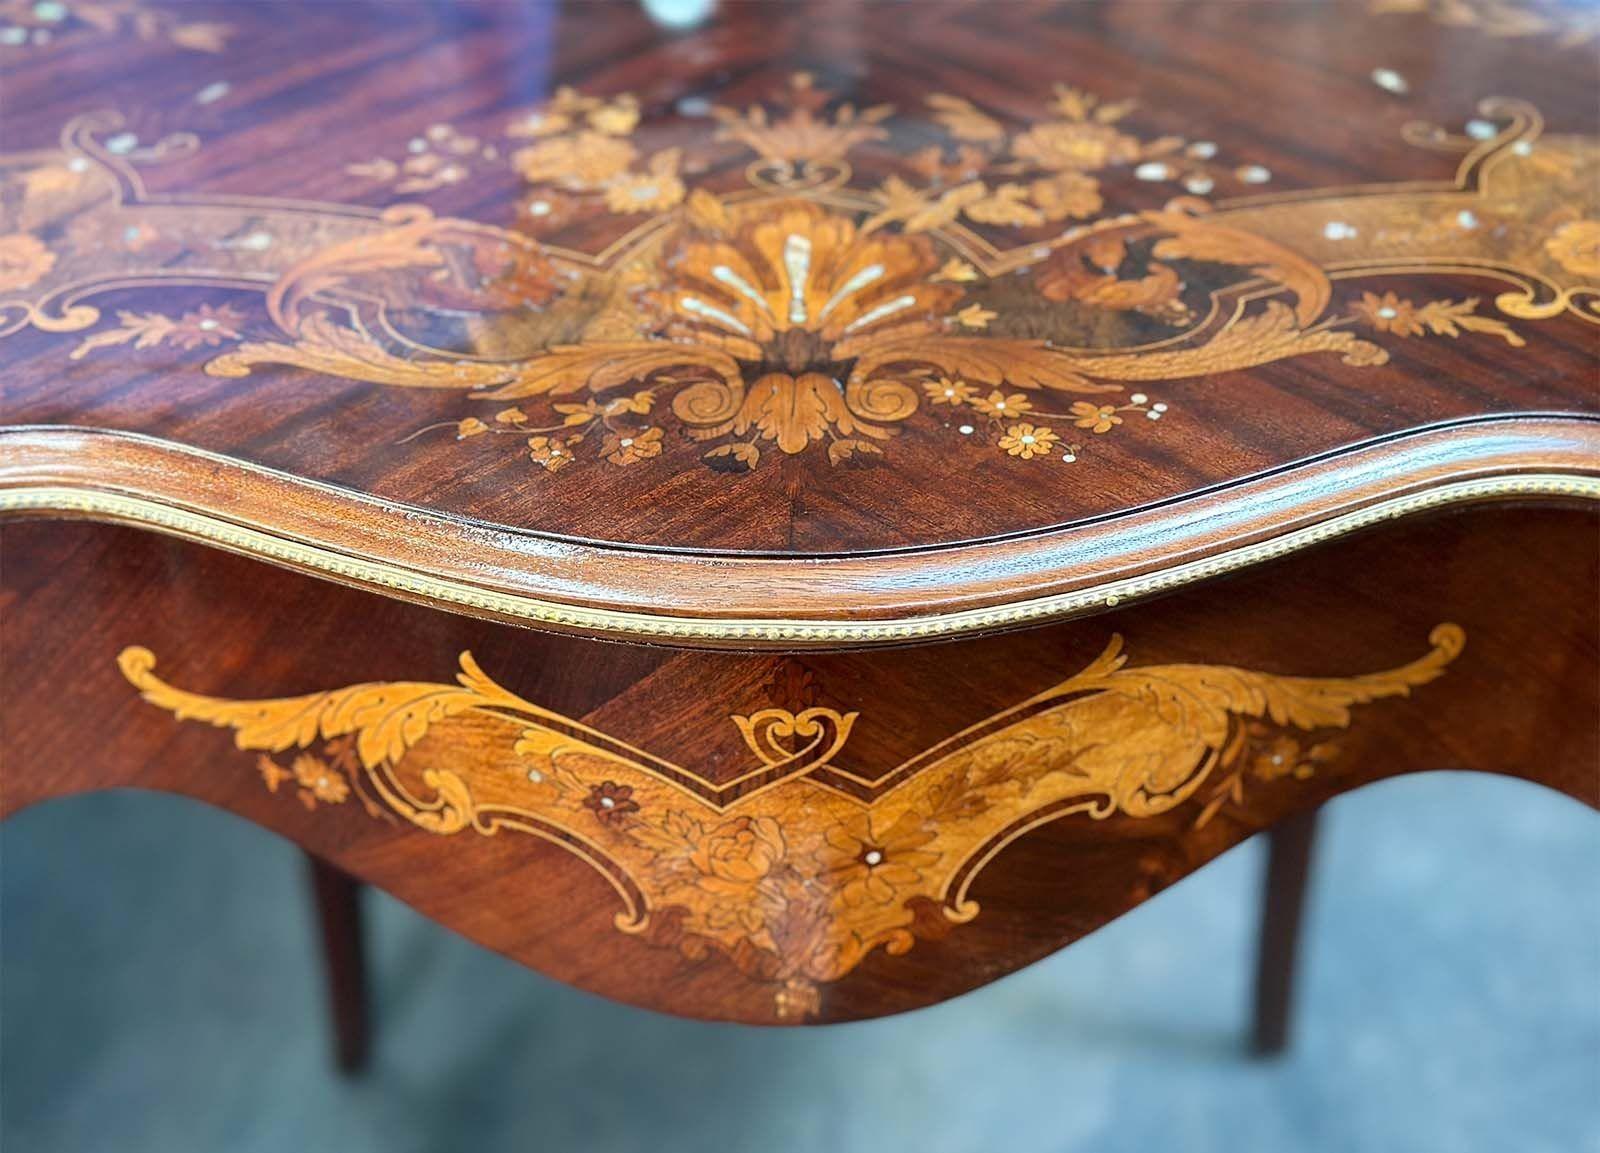 This exquisite French side table, crafted in the late 19th century, showcases the timeless beauty of wooden marquetry combined with elegant mother of pearl accents and intricate bronze mounts. The table's stunning marquetry work features intricate